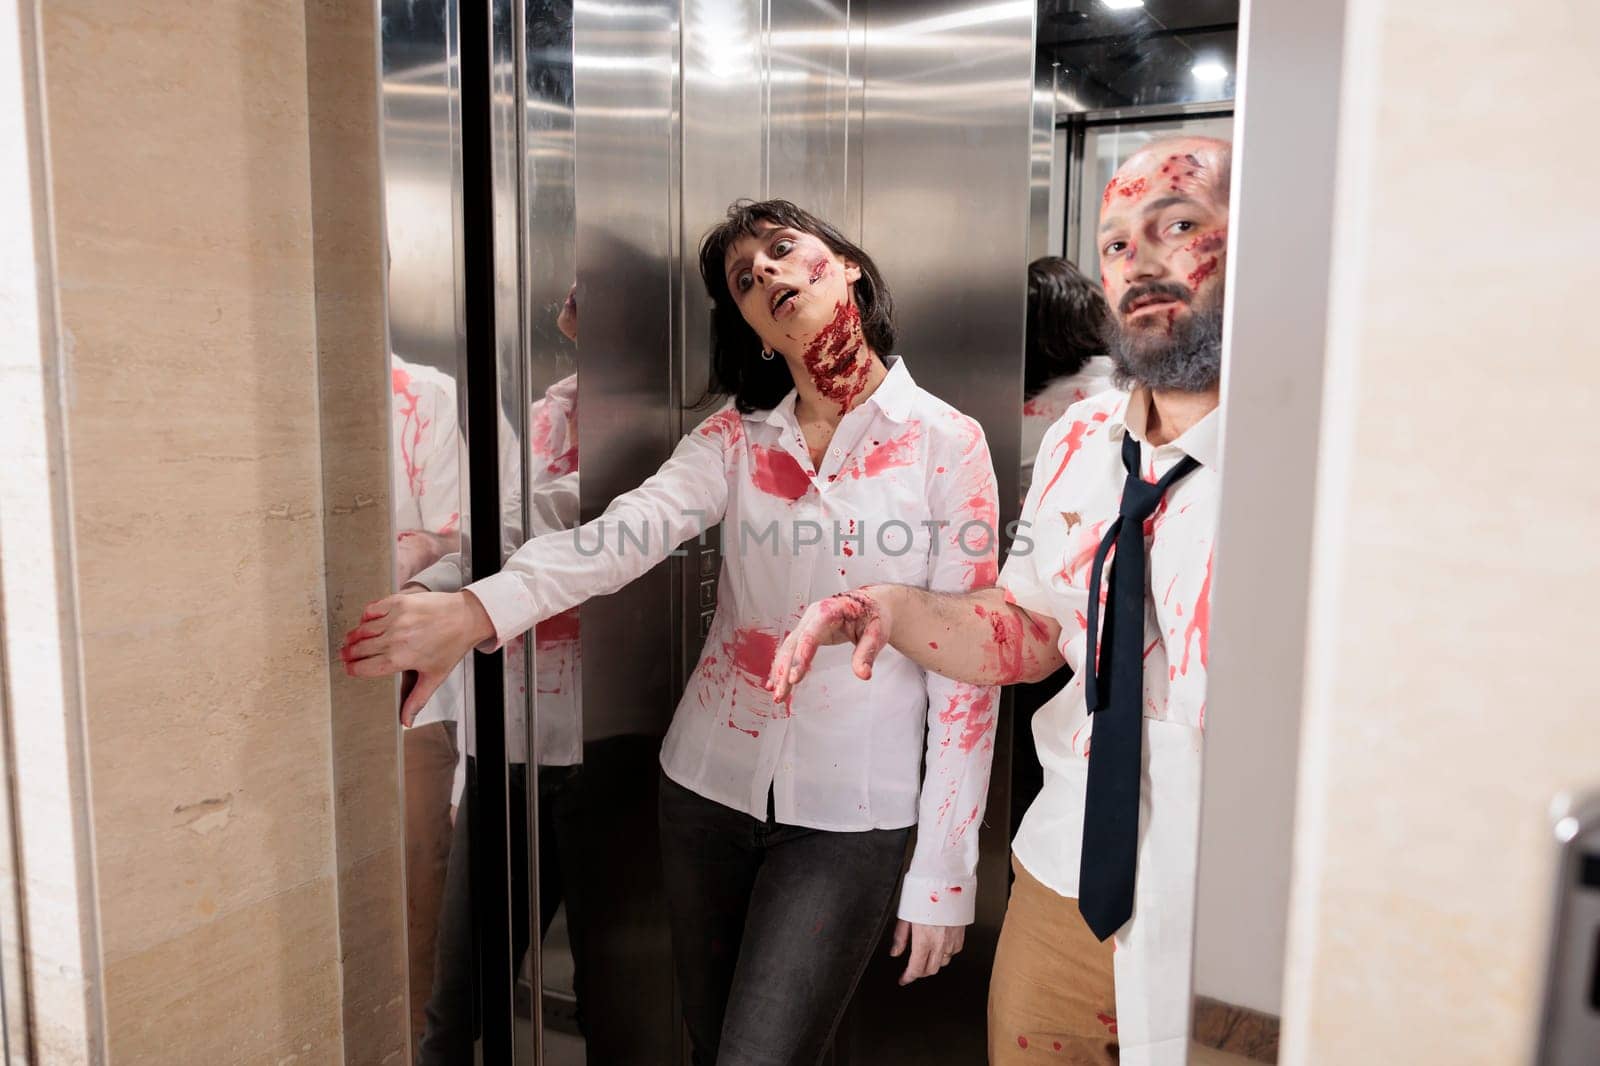 Colleagues covered in fake scars pretending to be zombies exiting escalator by DCStudio